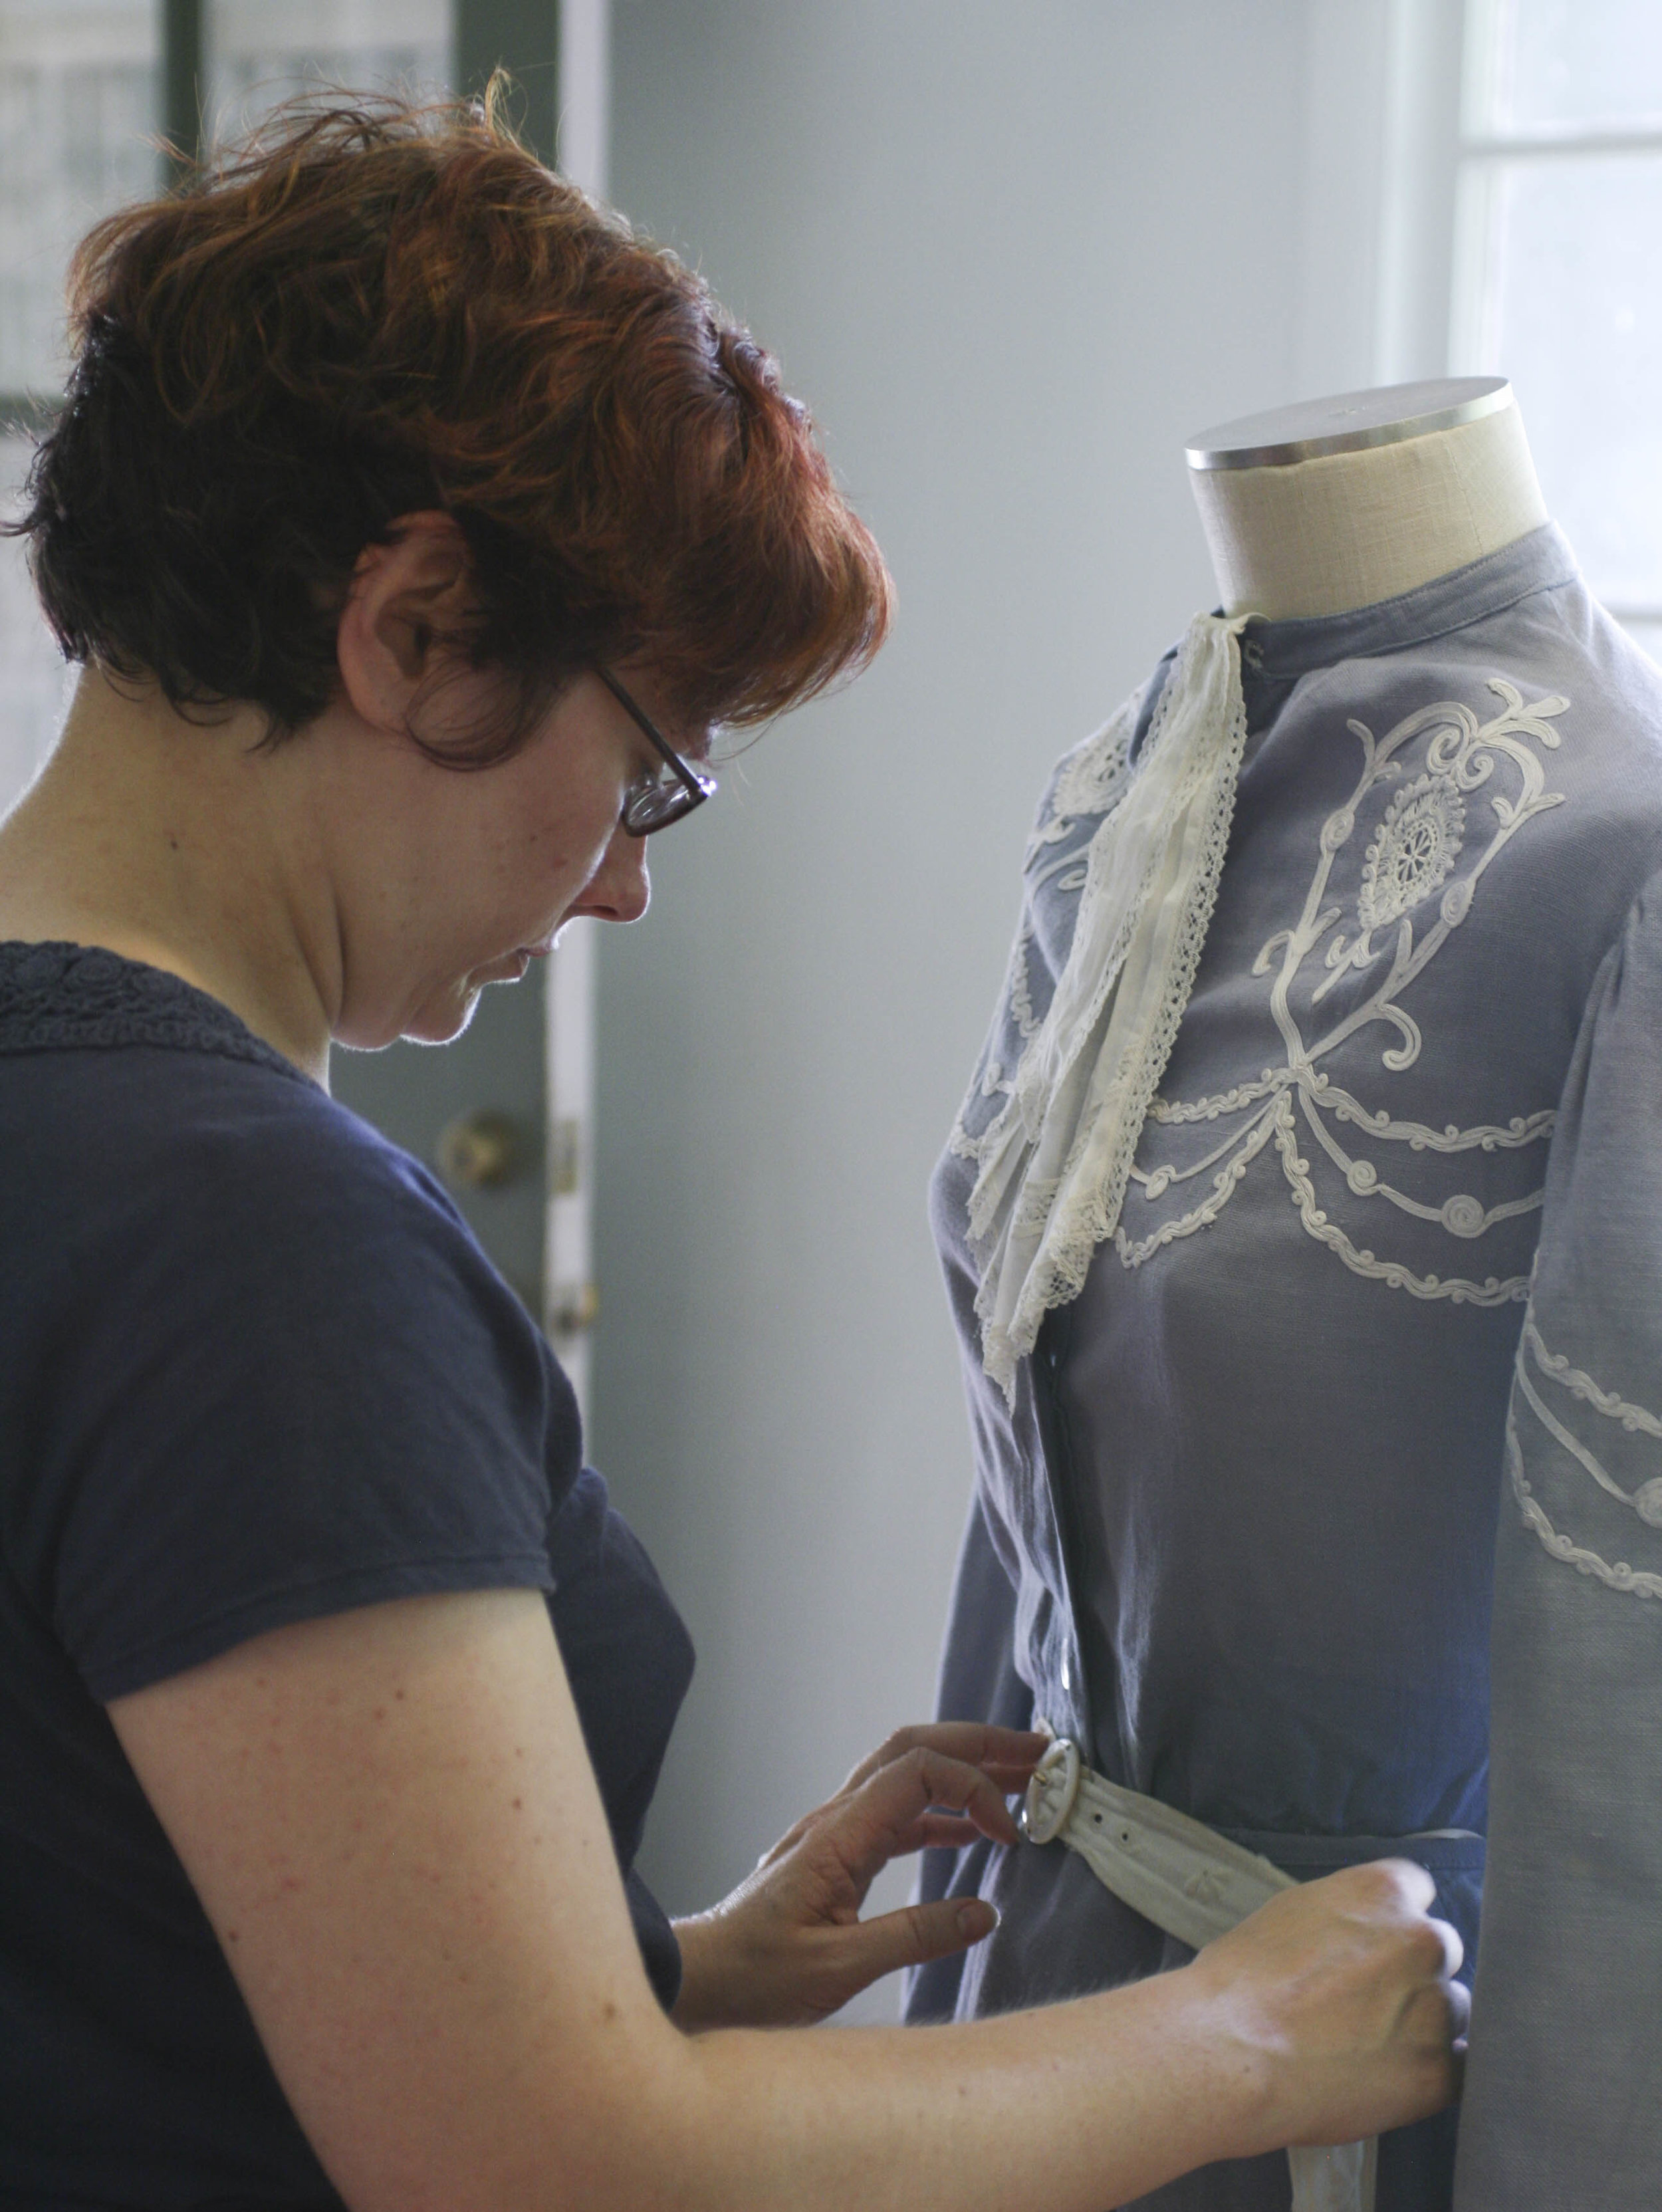  “Typically, we would take the garment apart to figure out how it was made, and create a pattern out of it,” Medlock said. She can’t do that with these historical pieces -- instead, she is examining each piece and taking detailed notes, drawings and 